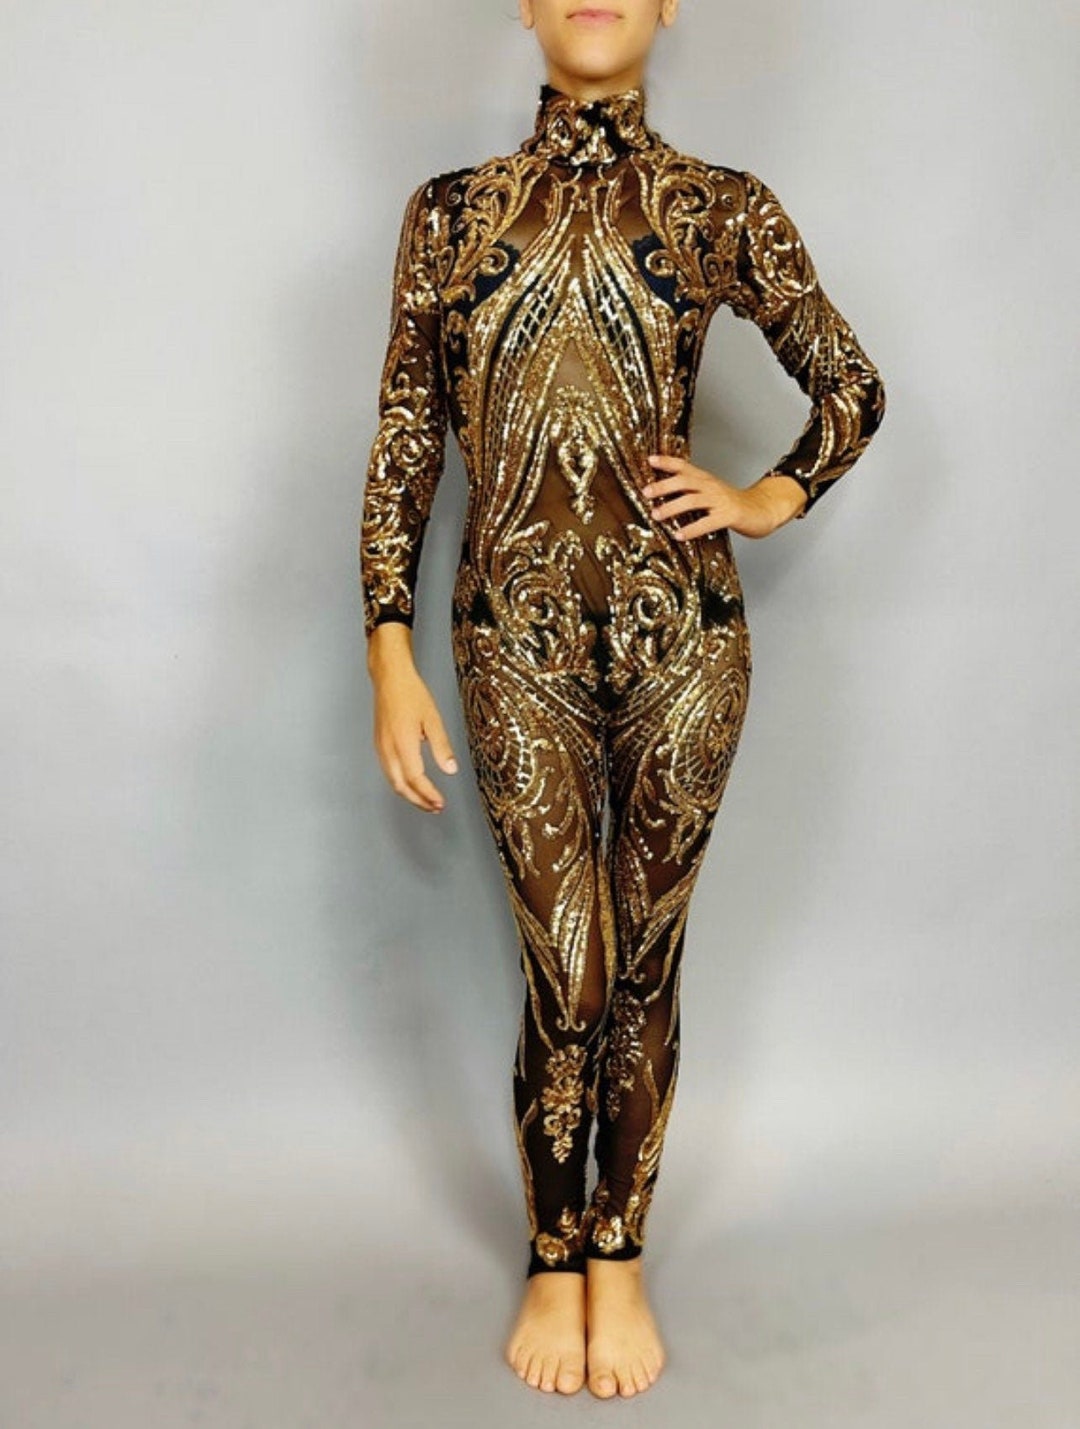 Gold Sequins Catsuit. Contortionist Costume Elegant Sexy - Etsy